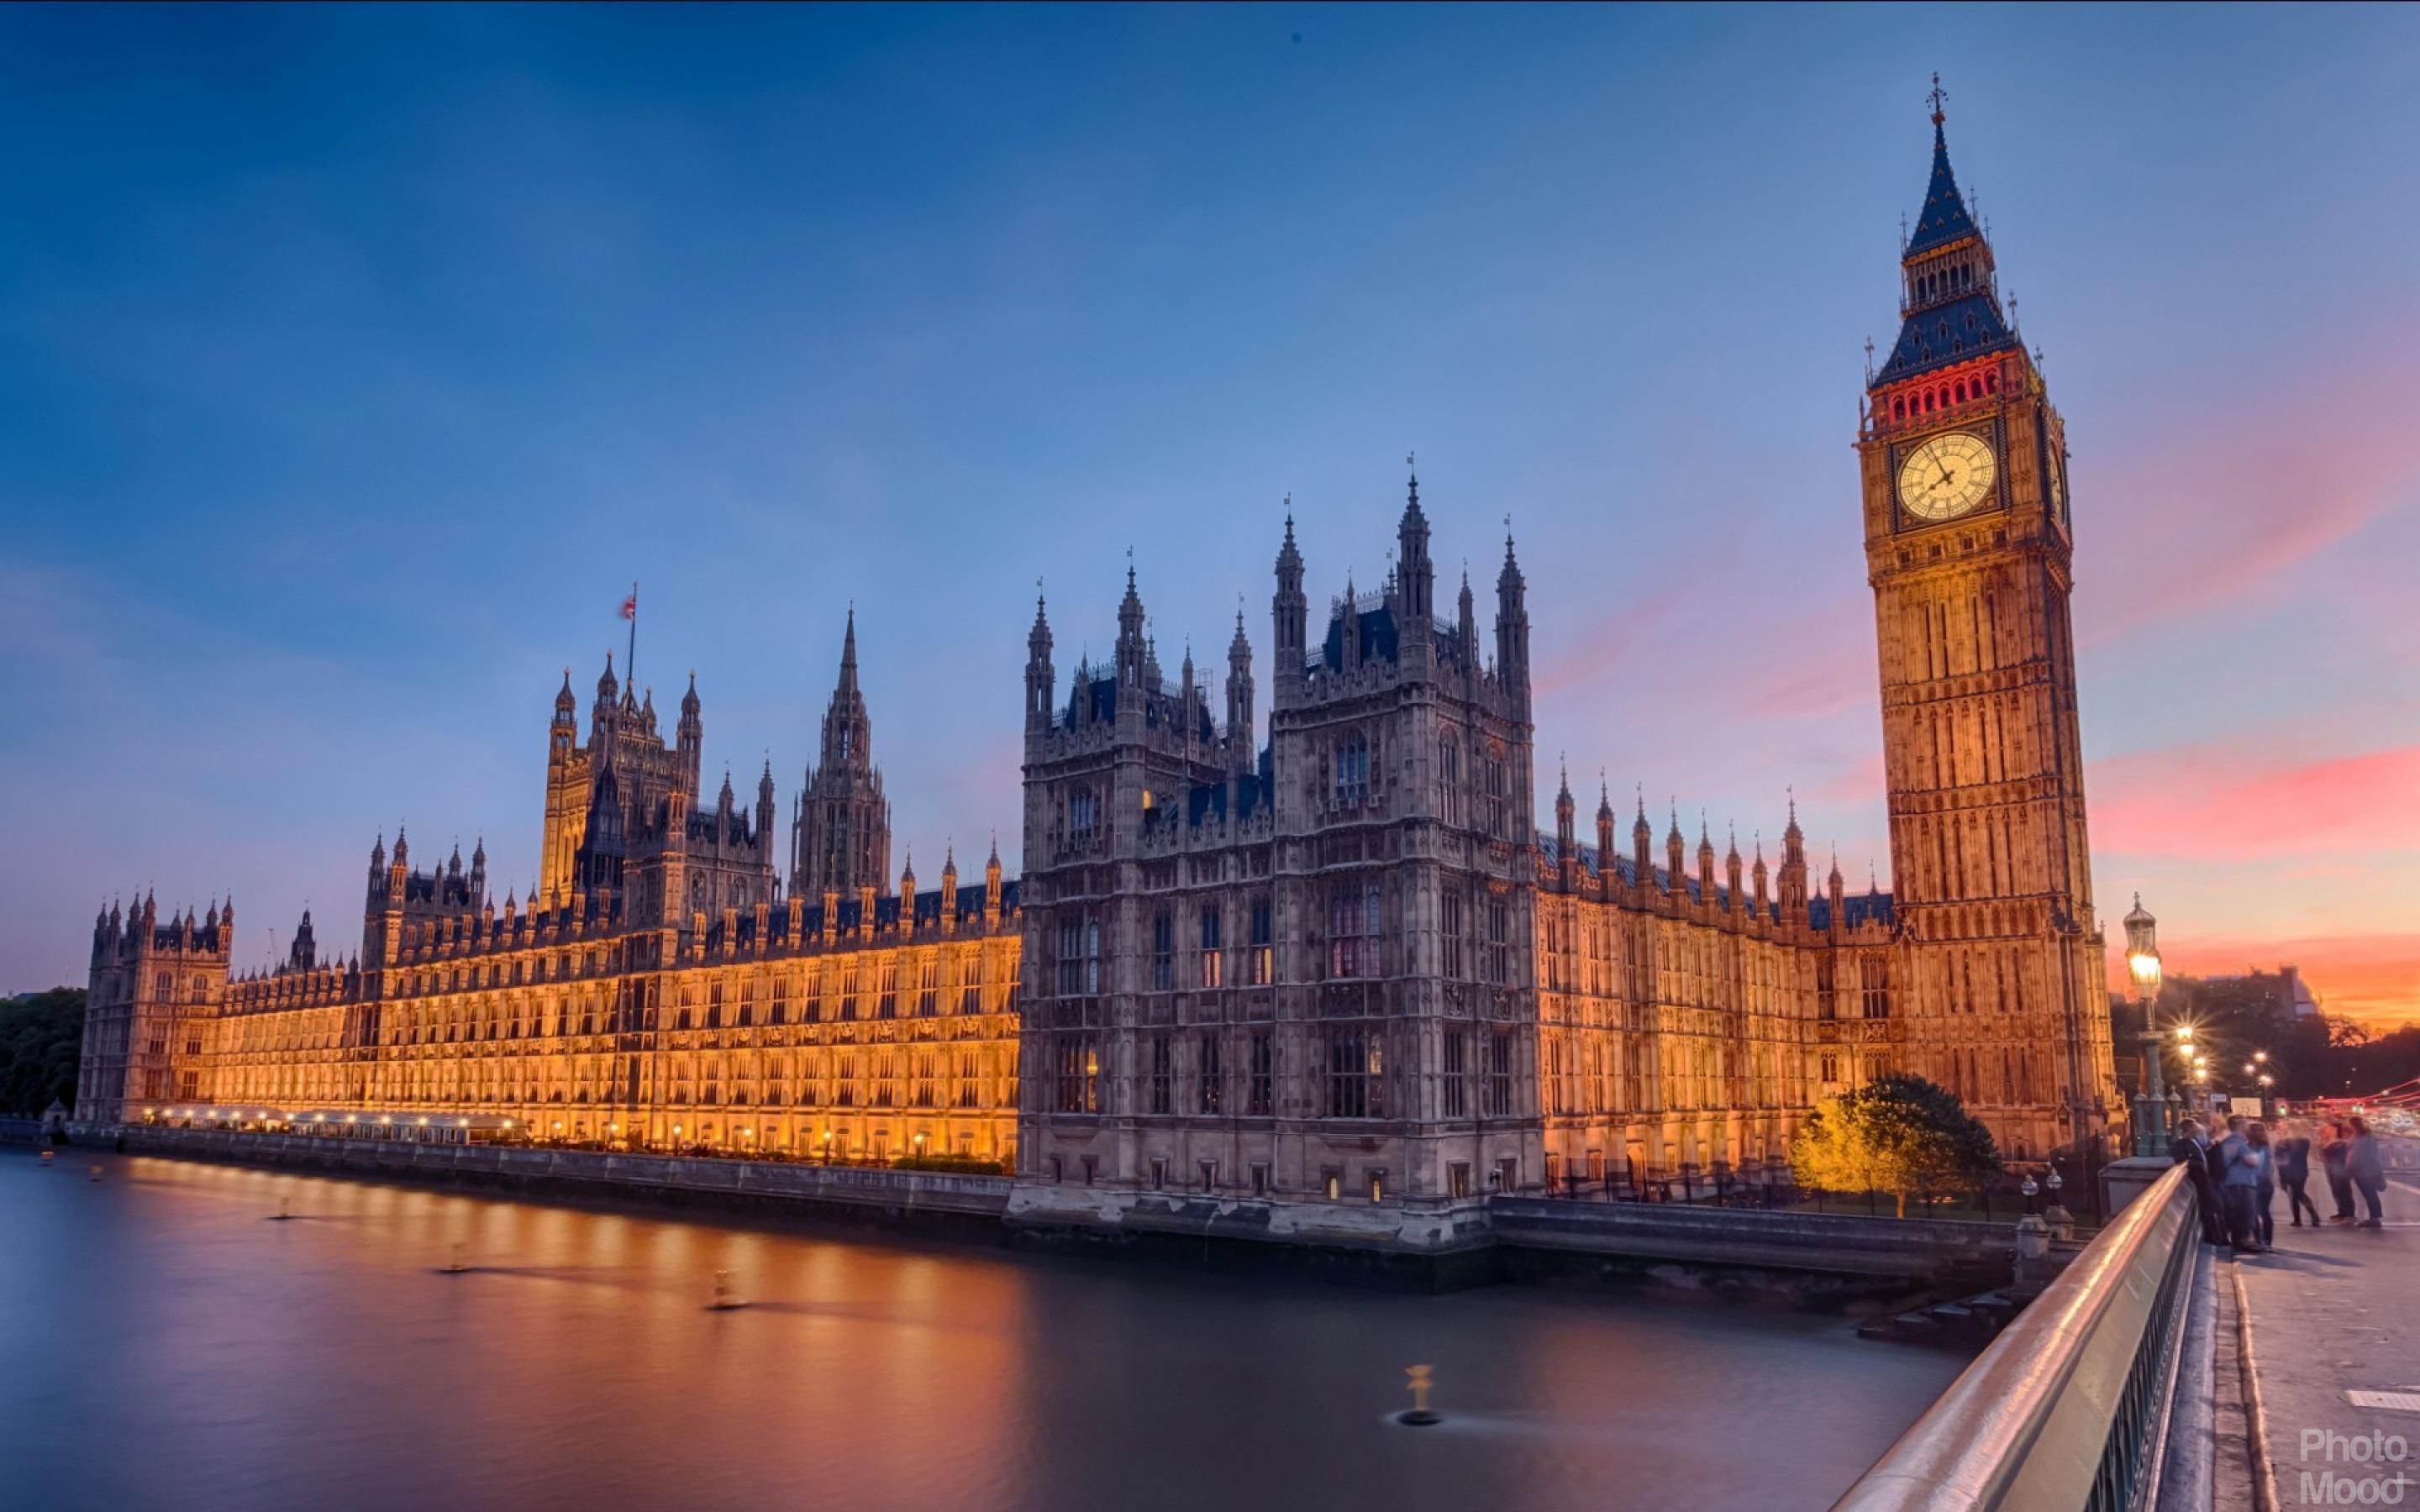 Free download thames palace of westminster london united kingdom wallpaper 2jpg [2880x1800] for your Desktop, Mobile & Tablet. Explore United Kingdom Wallpaper. British Wallpaper Manufacturers, UK Wallpaper Suppliers